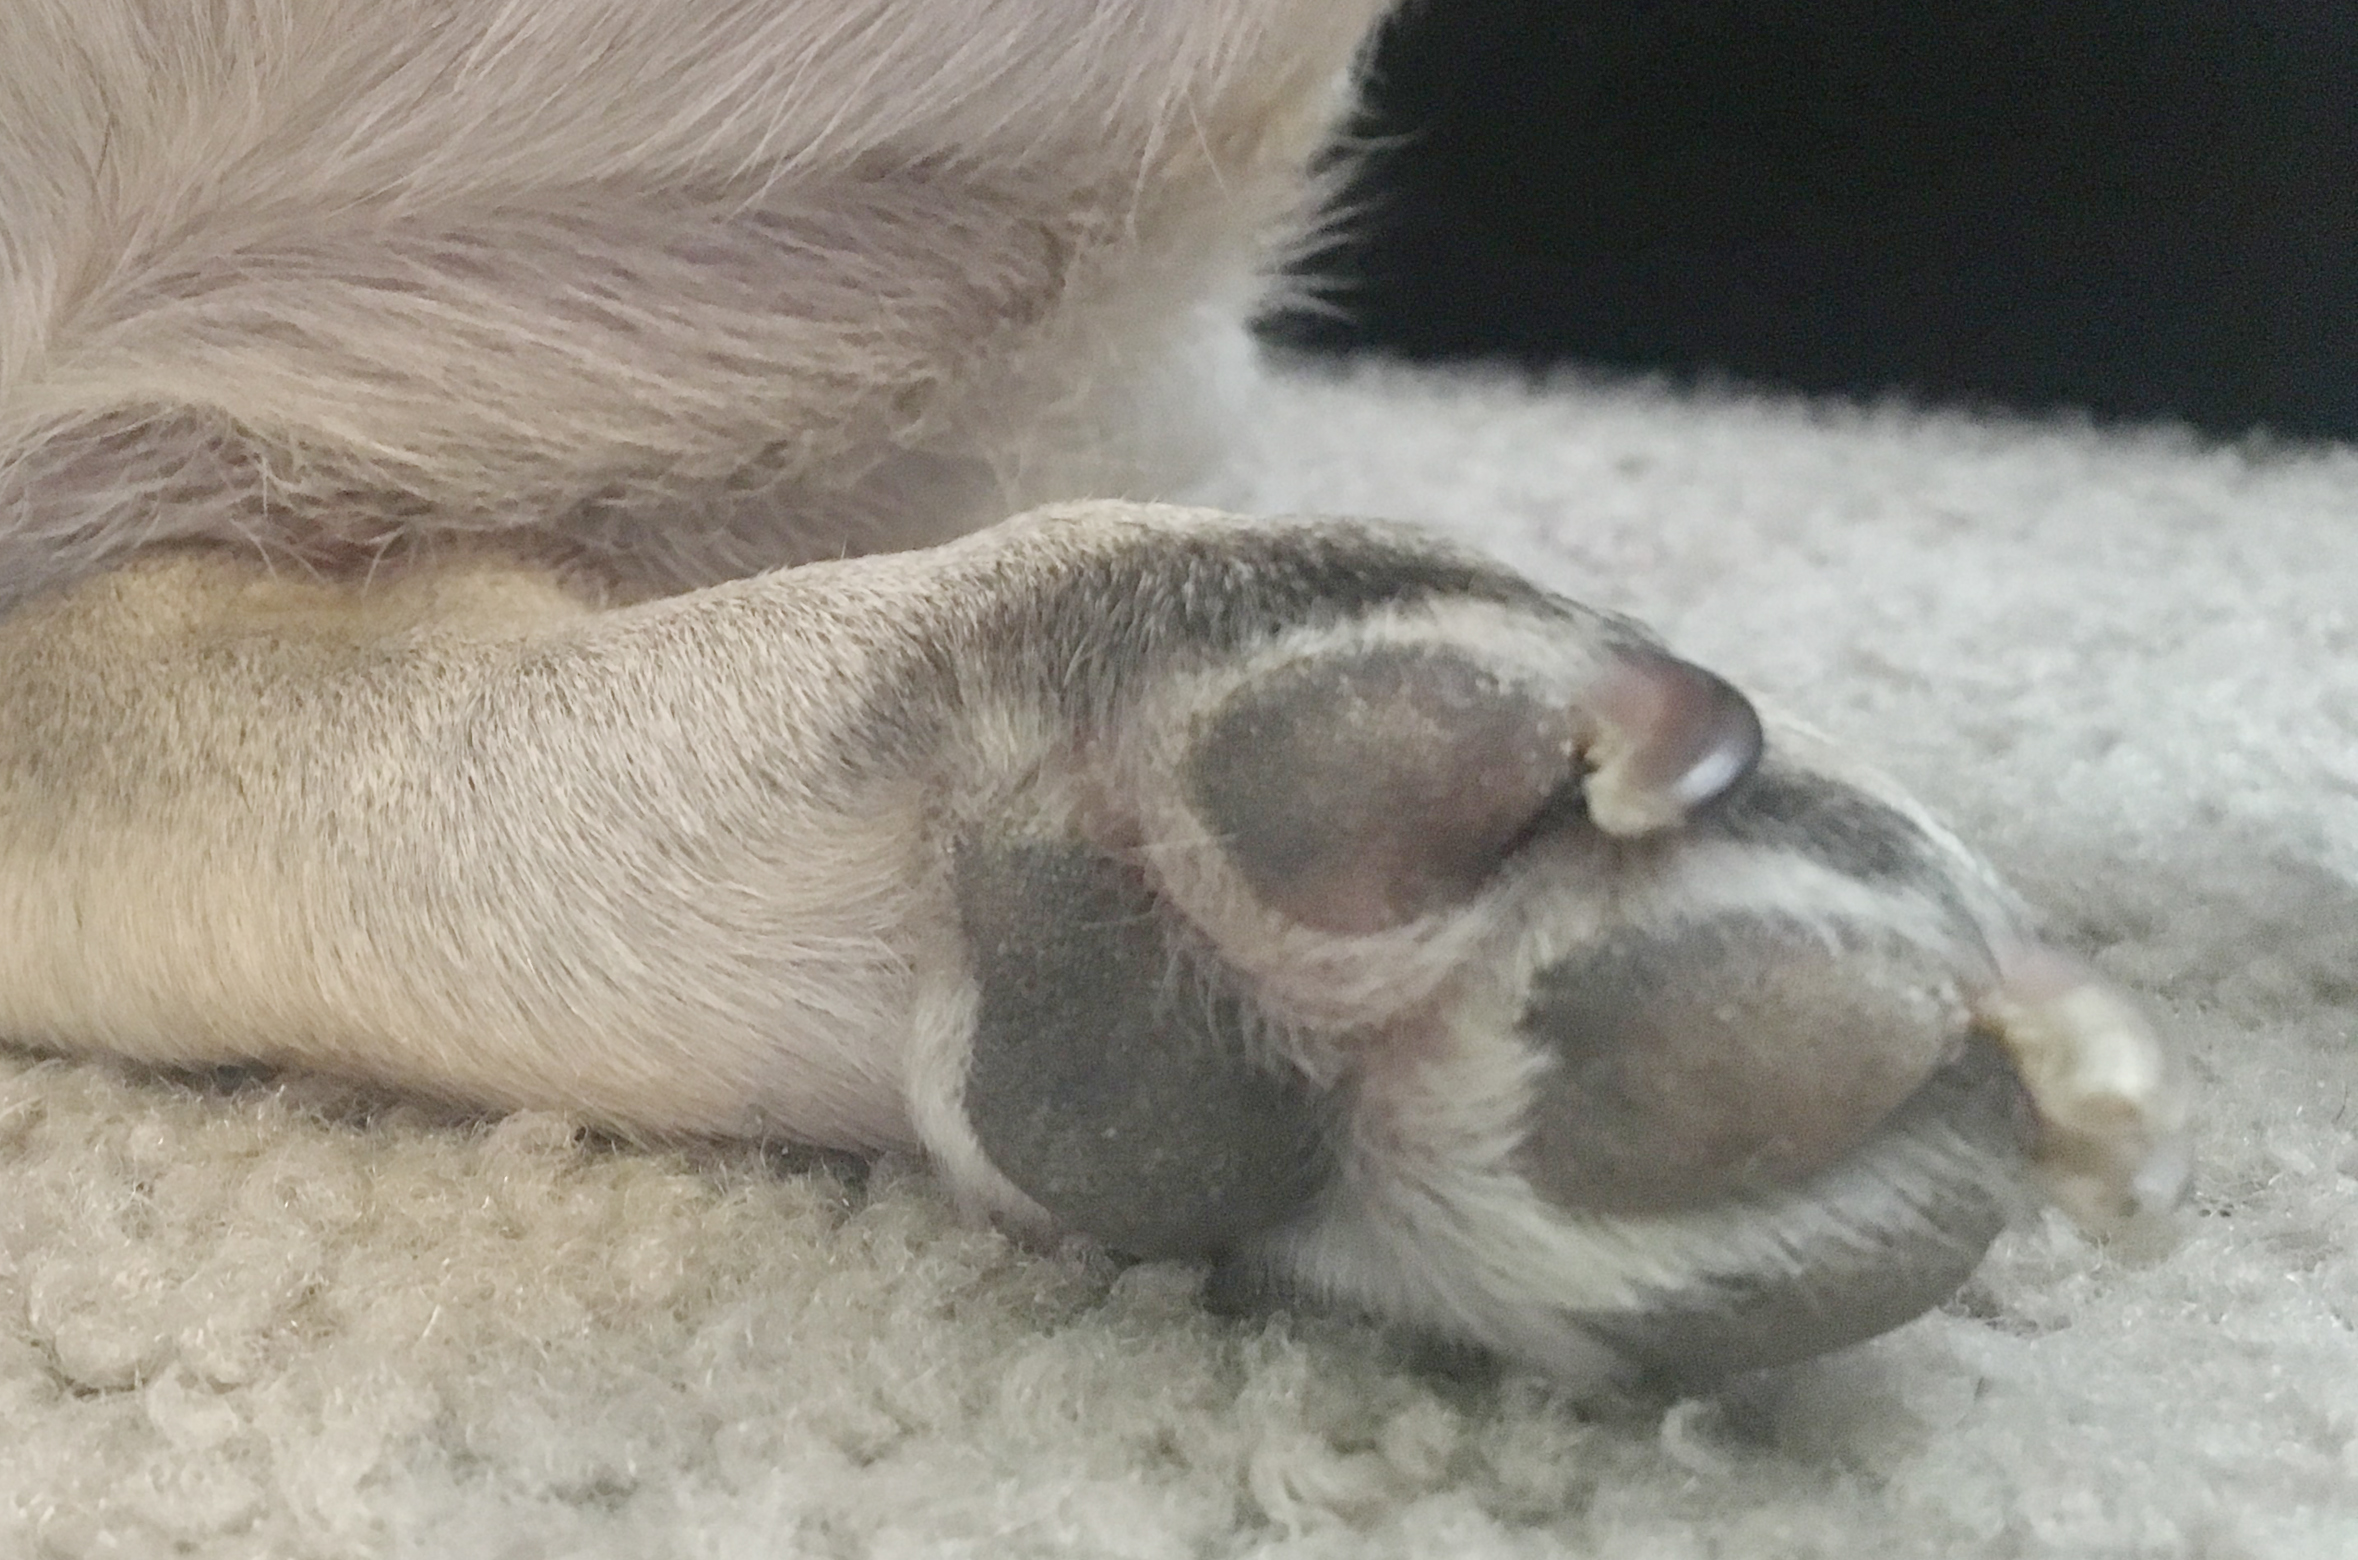 How Do I Keep My Pug’s Feet From Freezing in the Cold Weather?